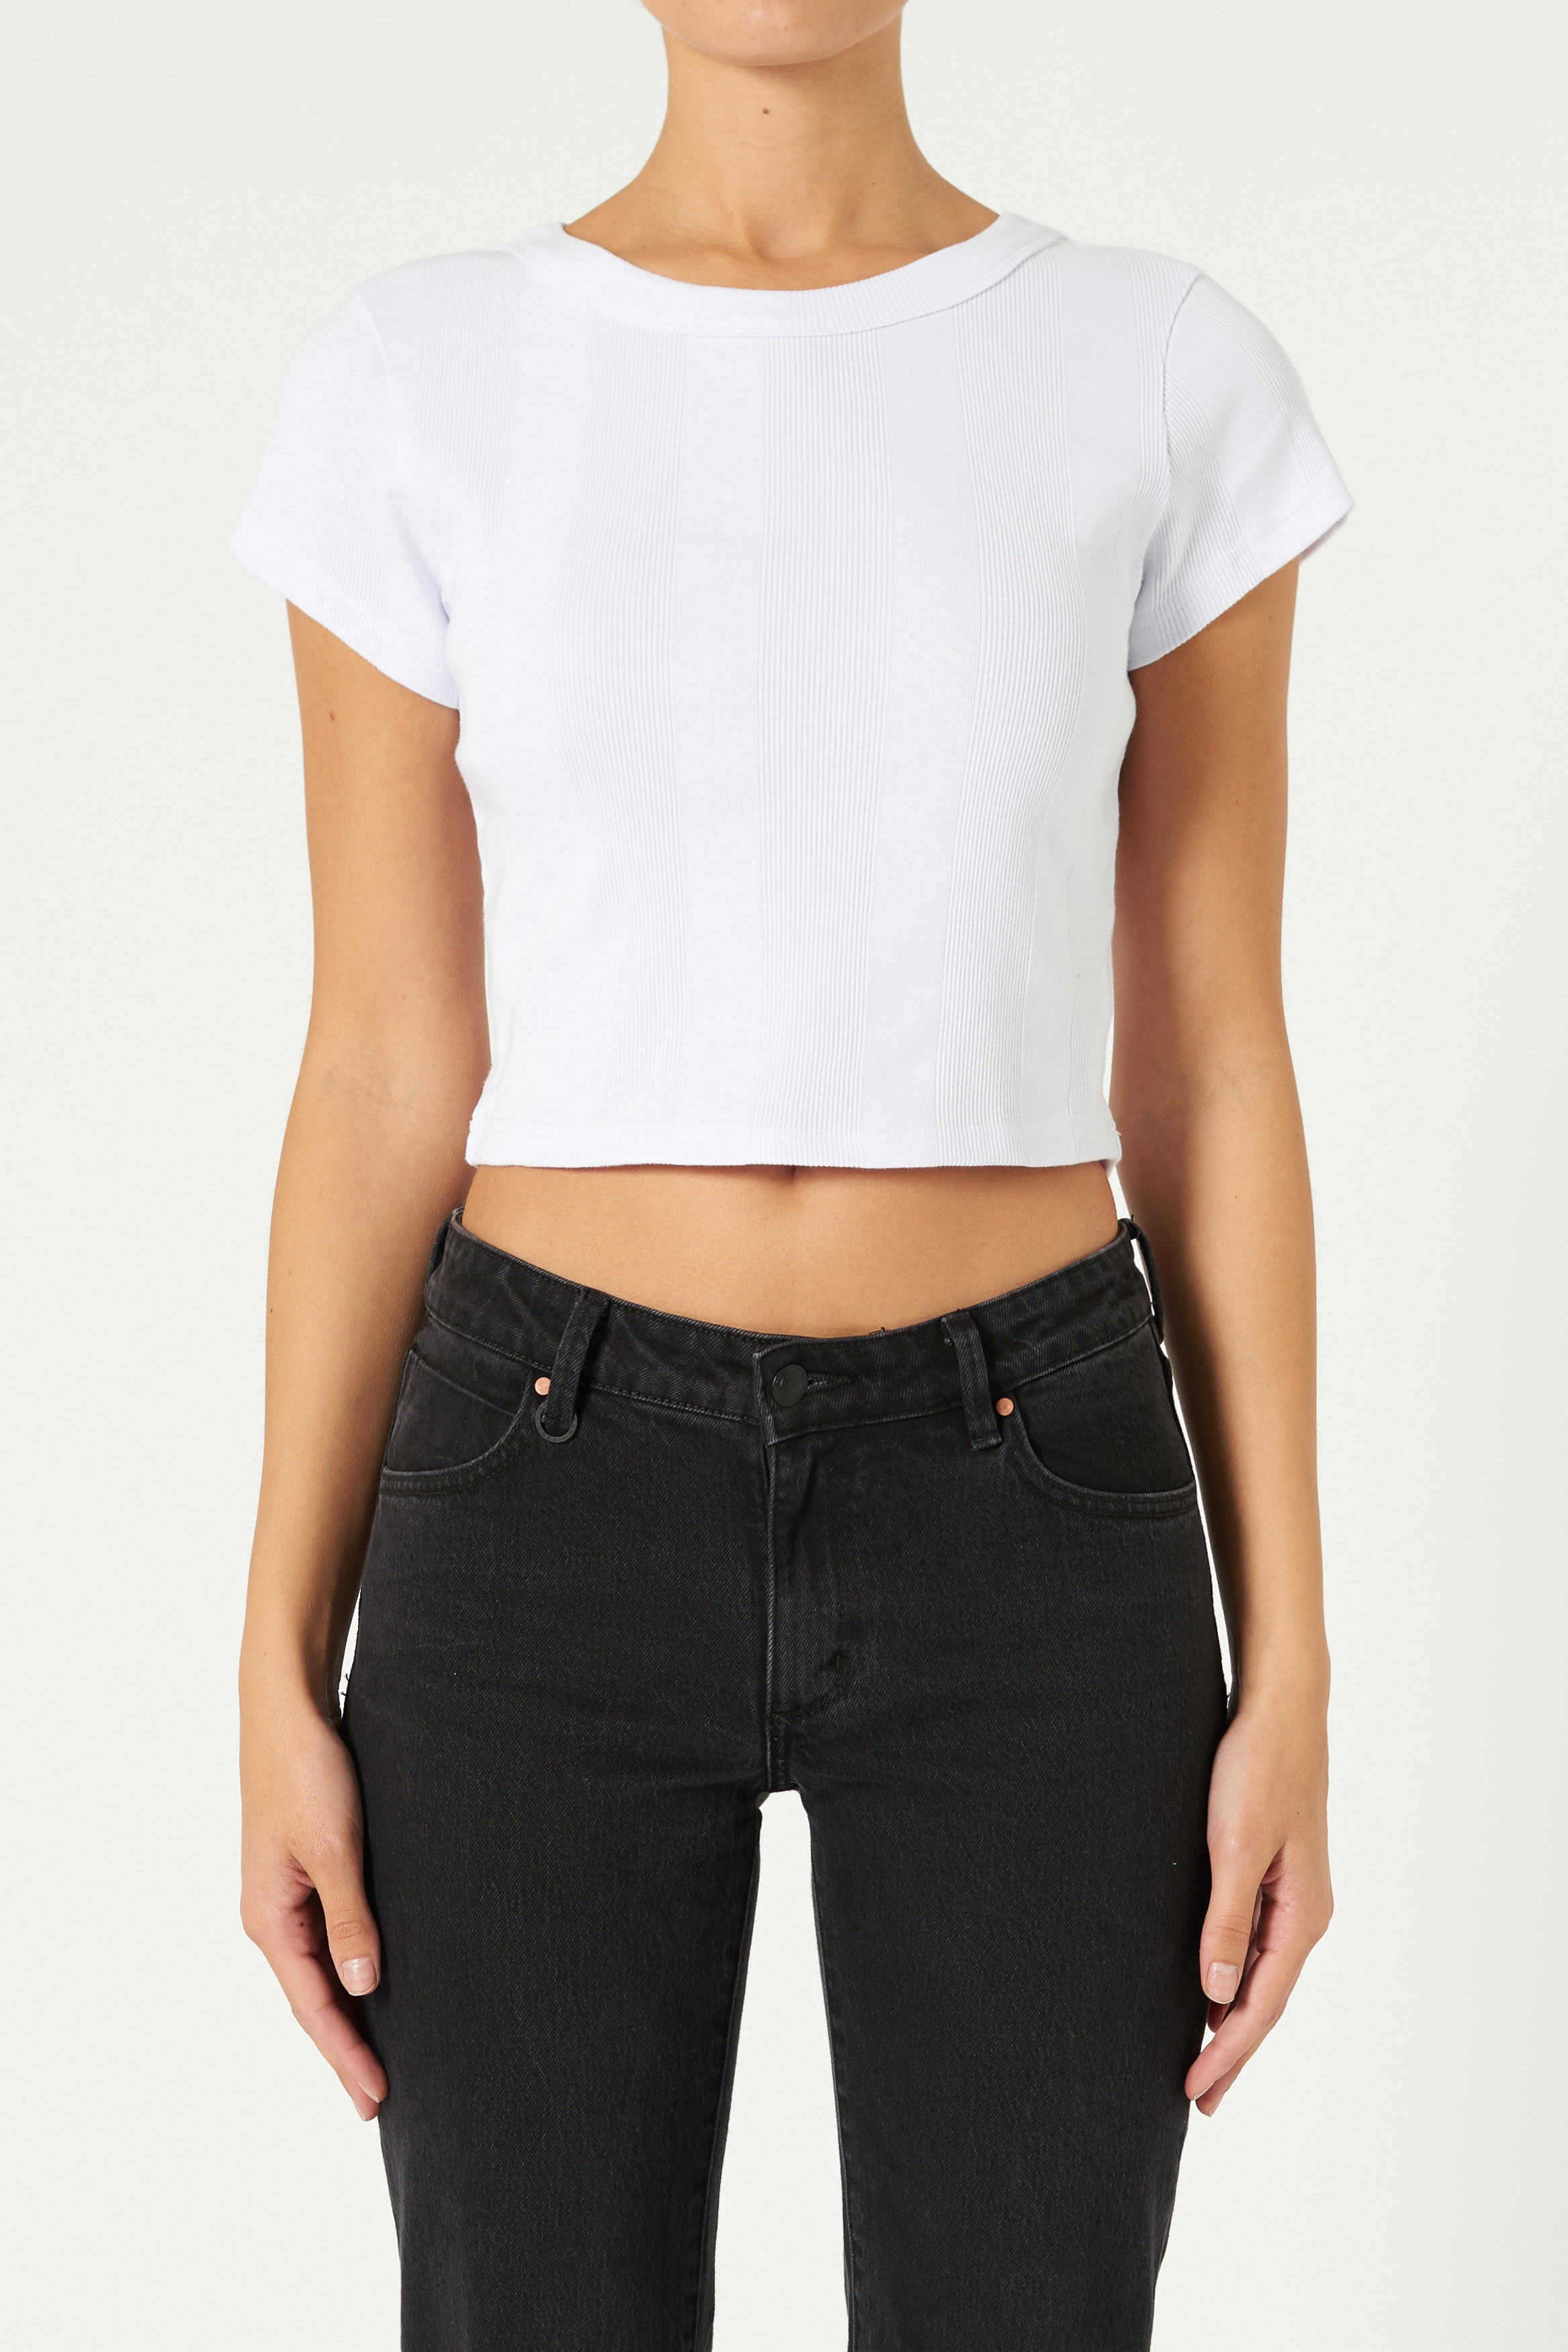 Frenchie Crop Tee